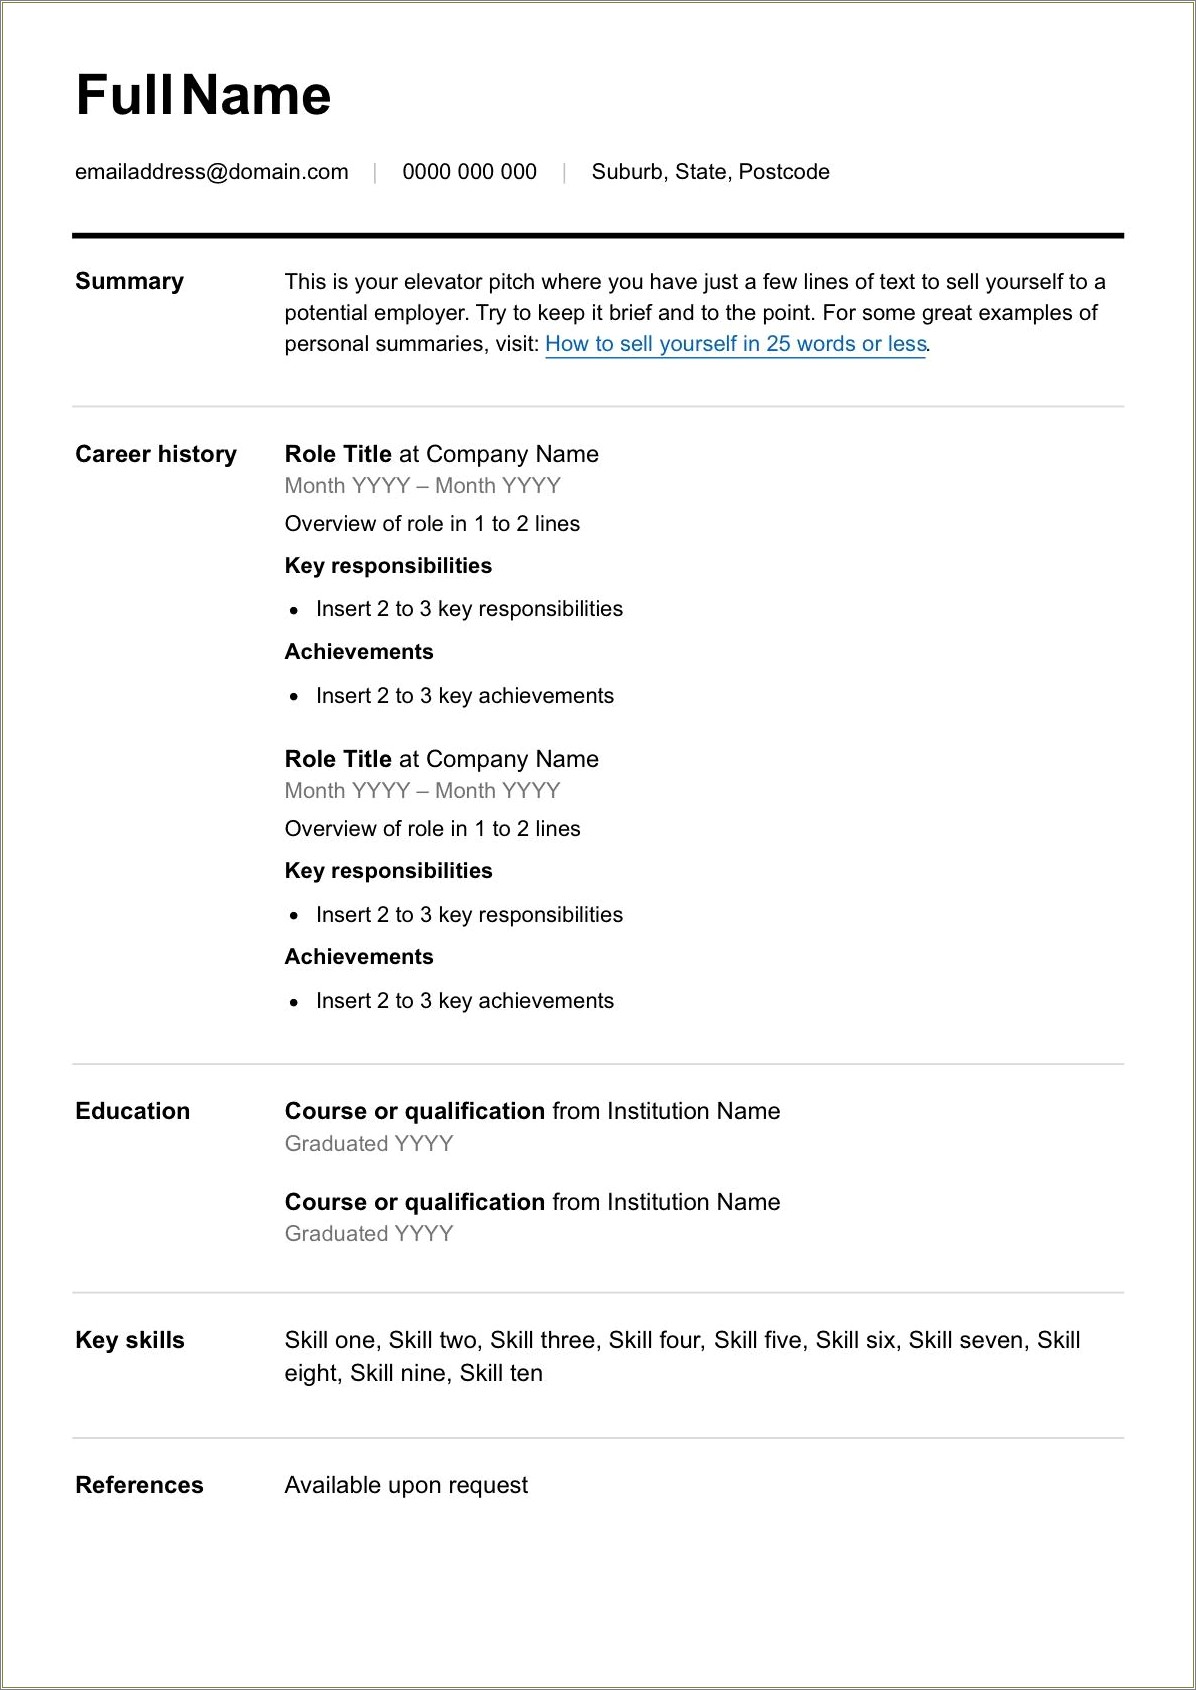 Resume For Federal Jobs Reserve Experience